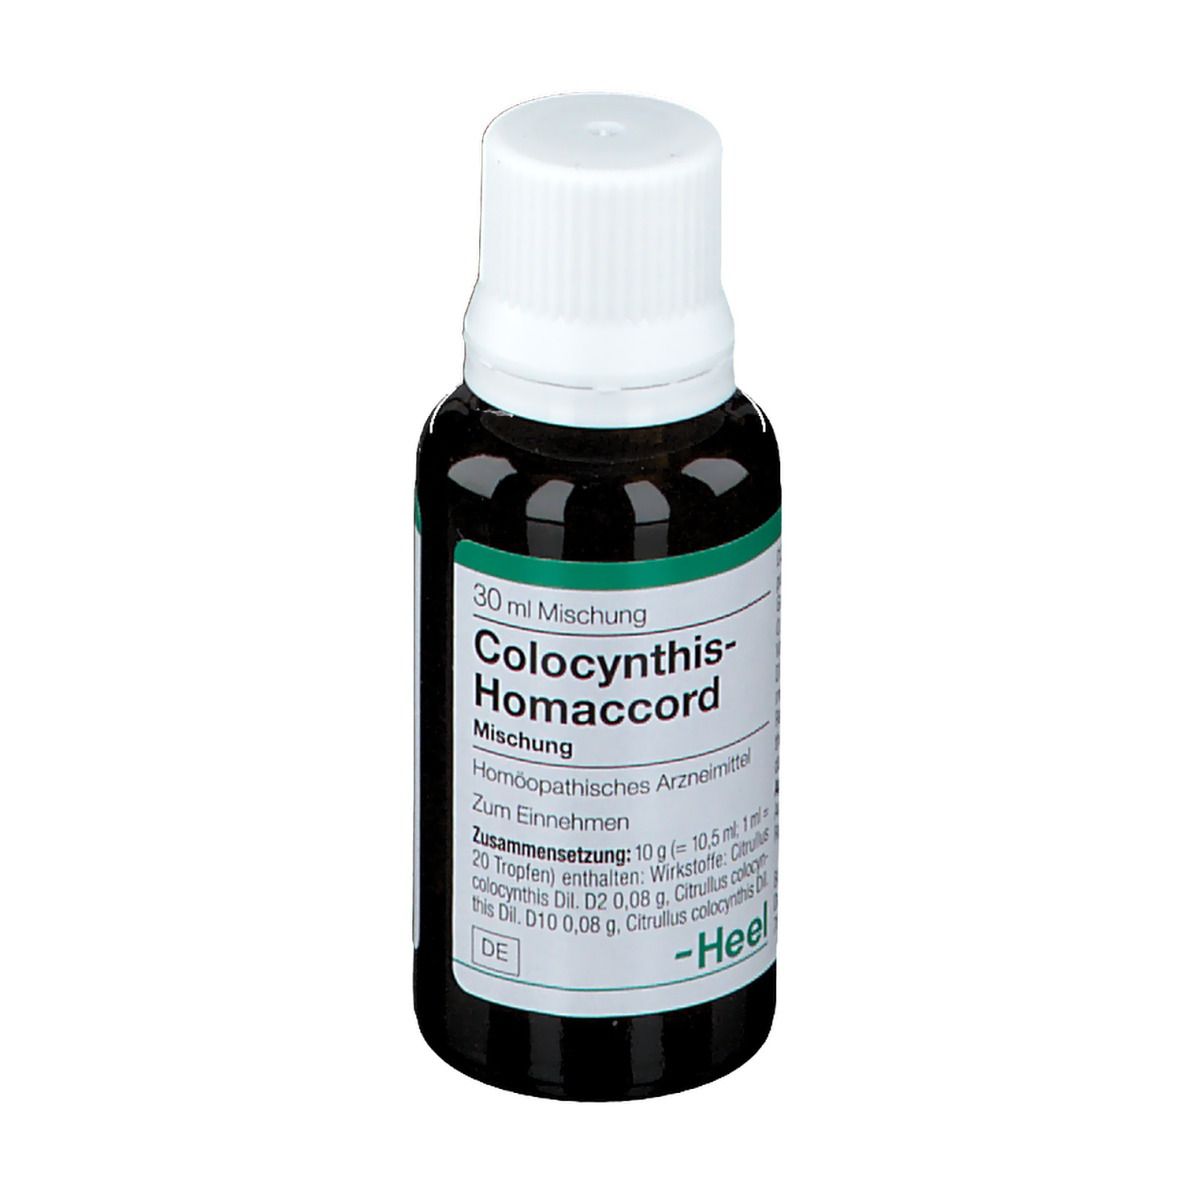 Colocynthis-Homaccord® Mischung